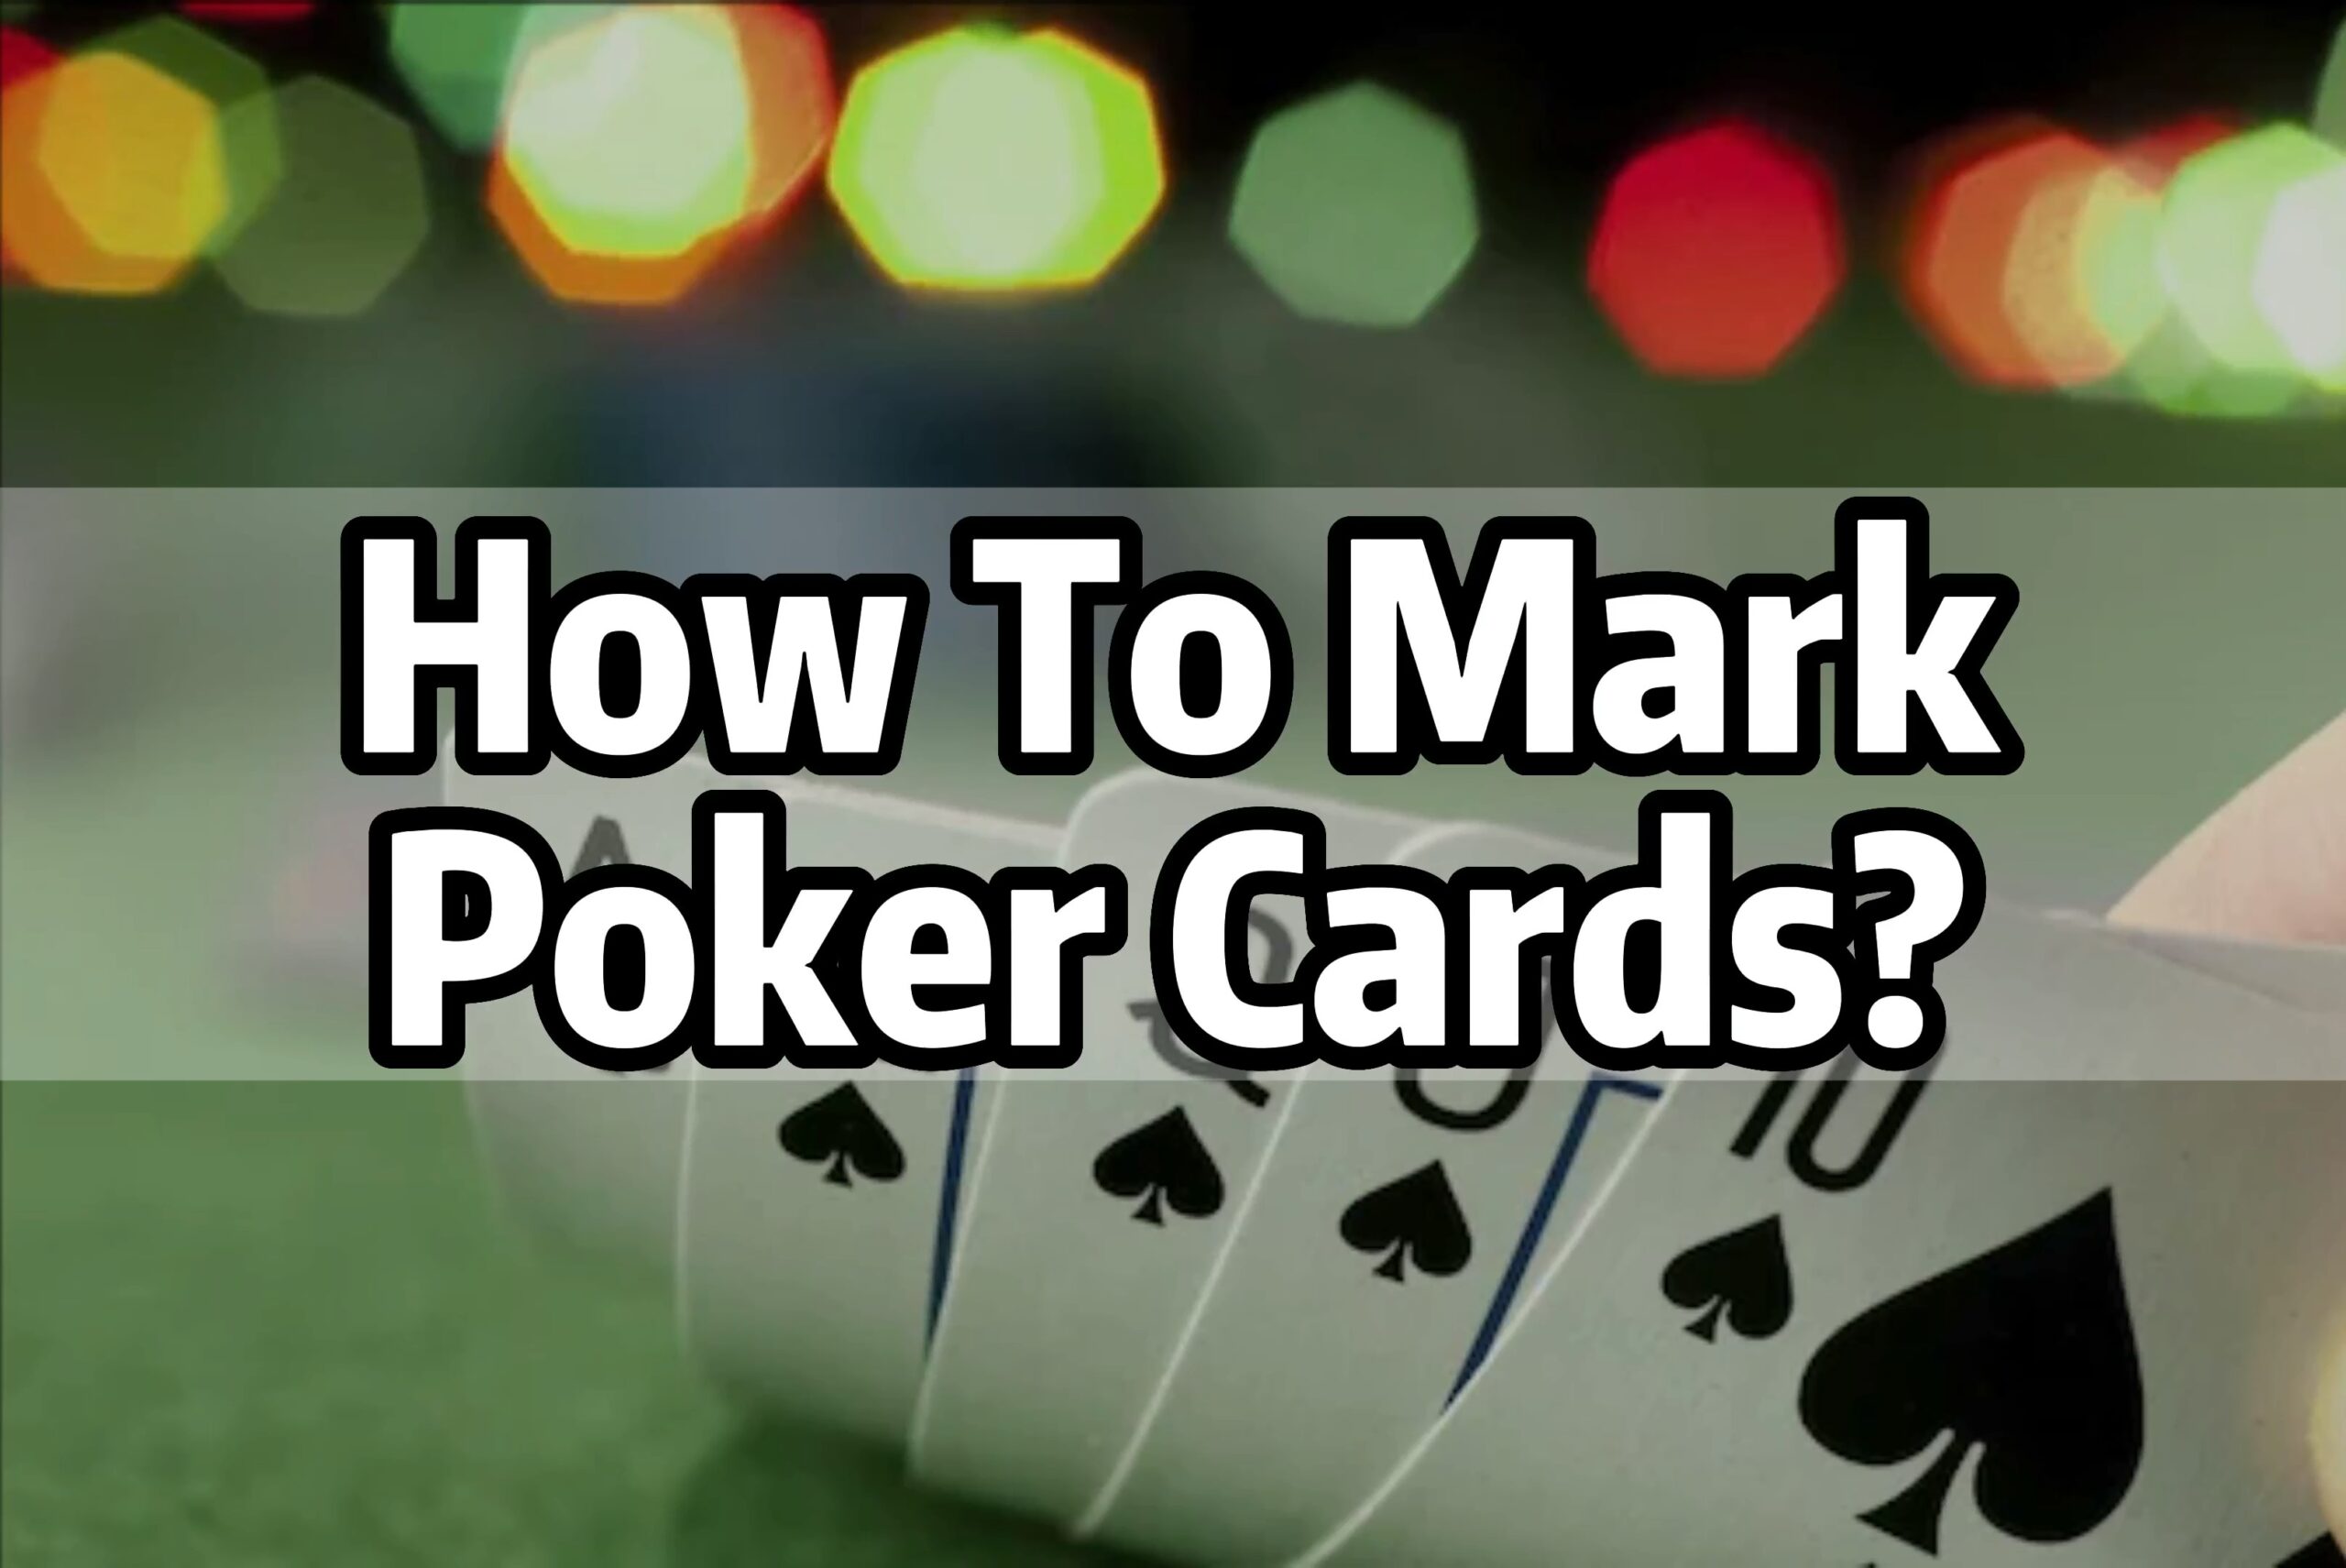 How To Mark Poker Cards